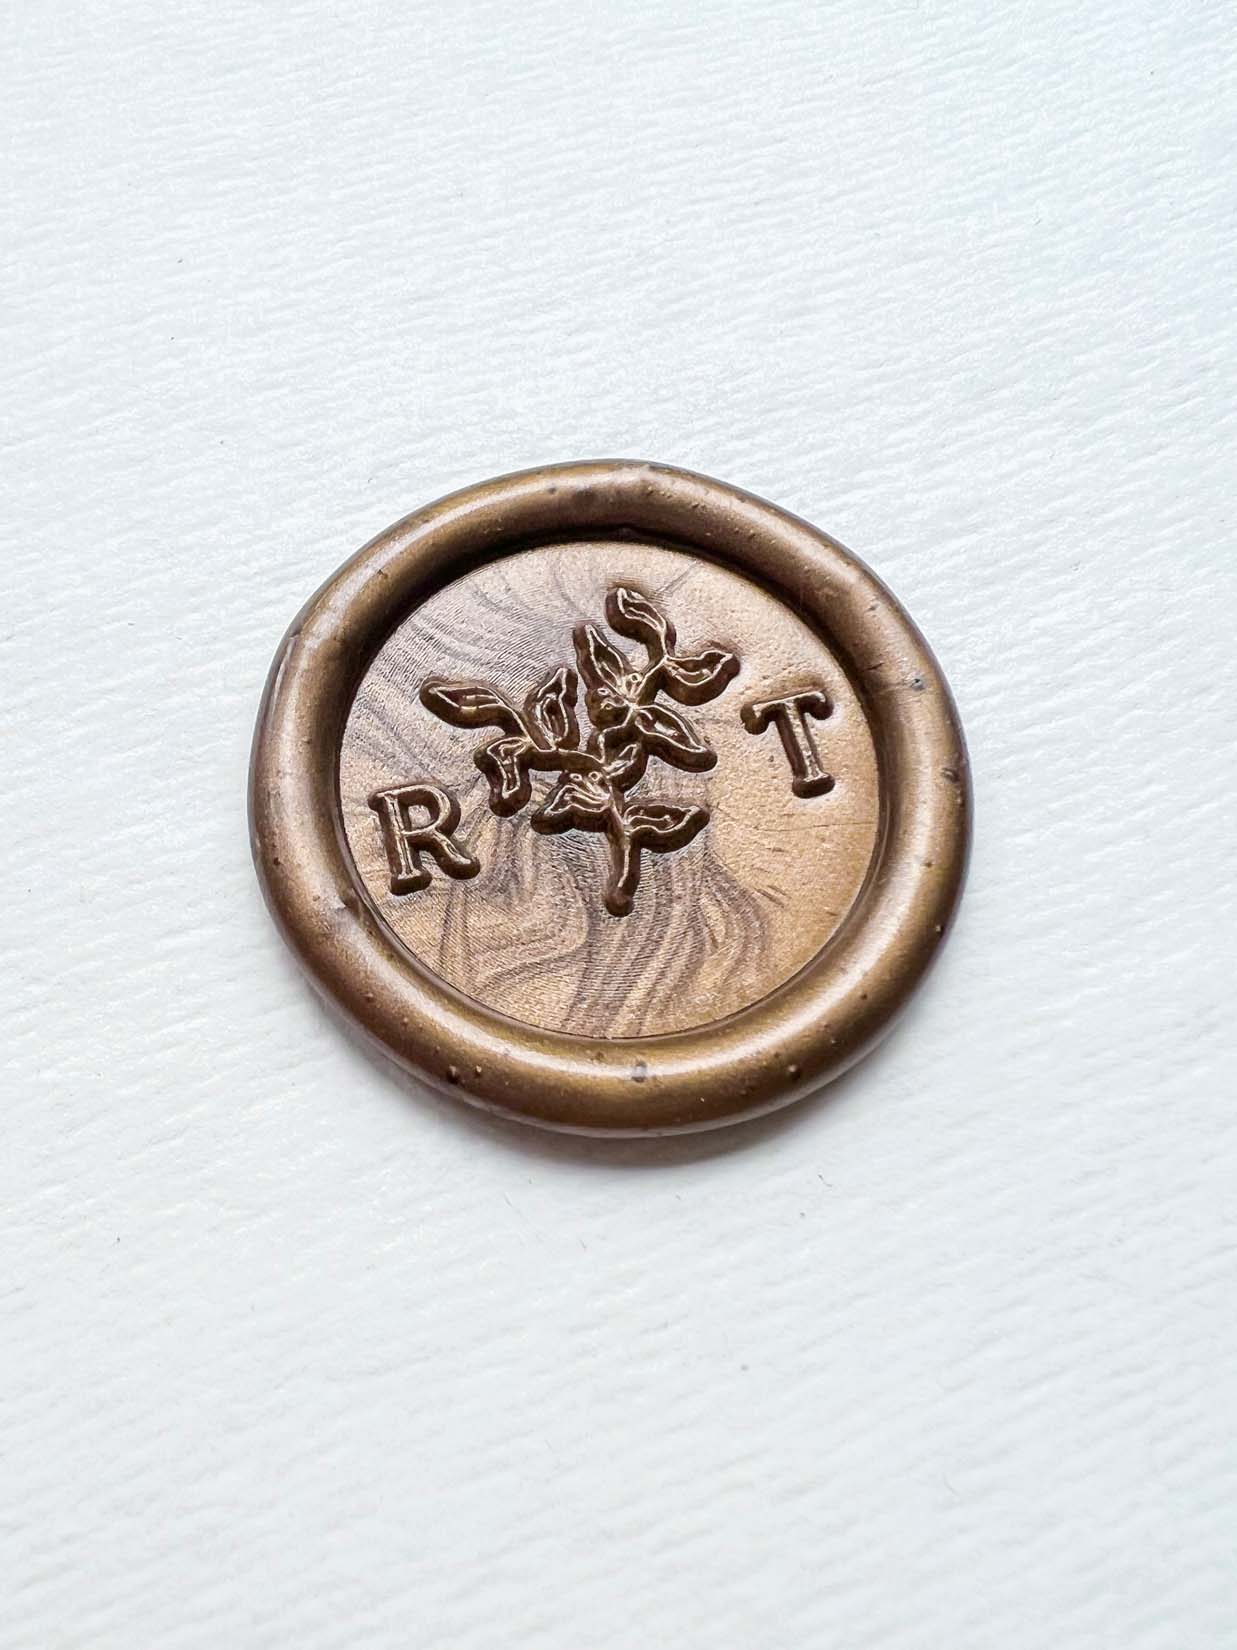 Wax Seal Stamp Lucy